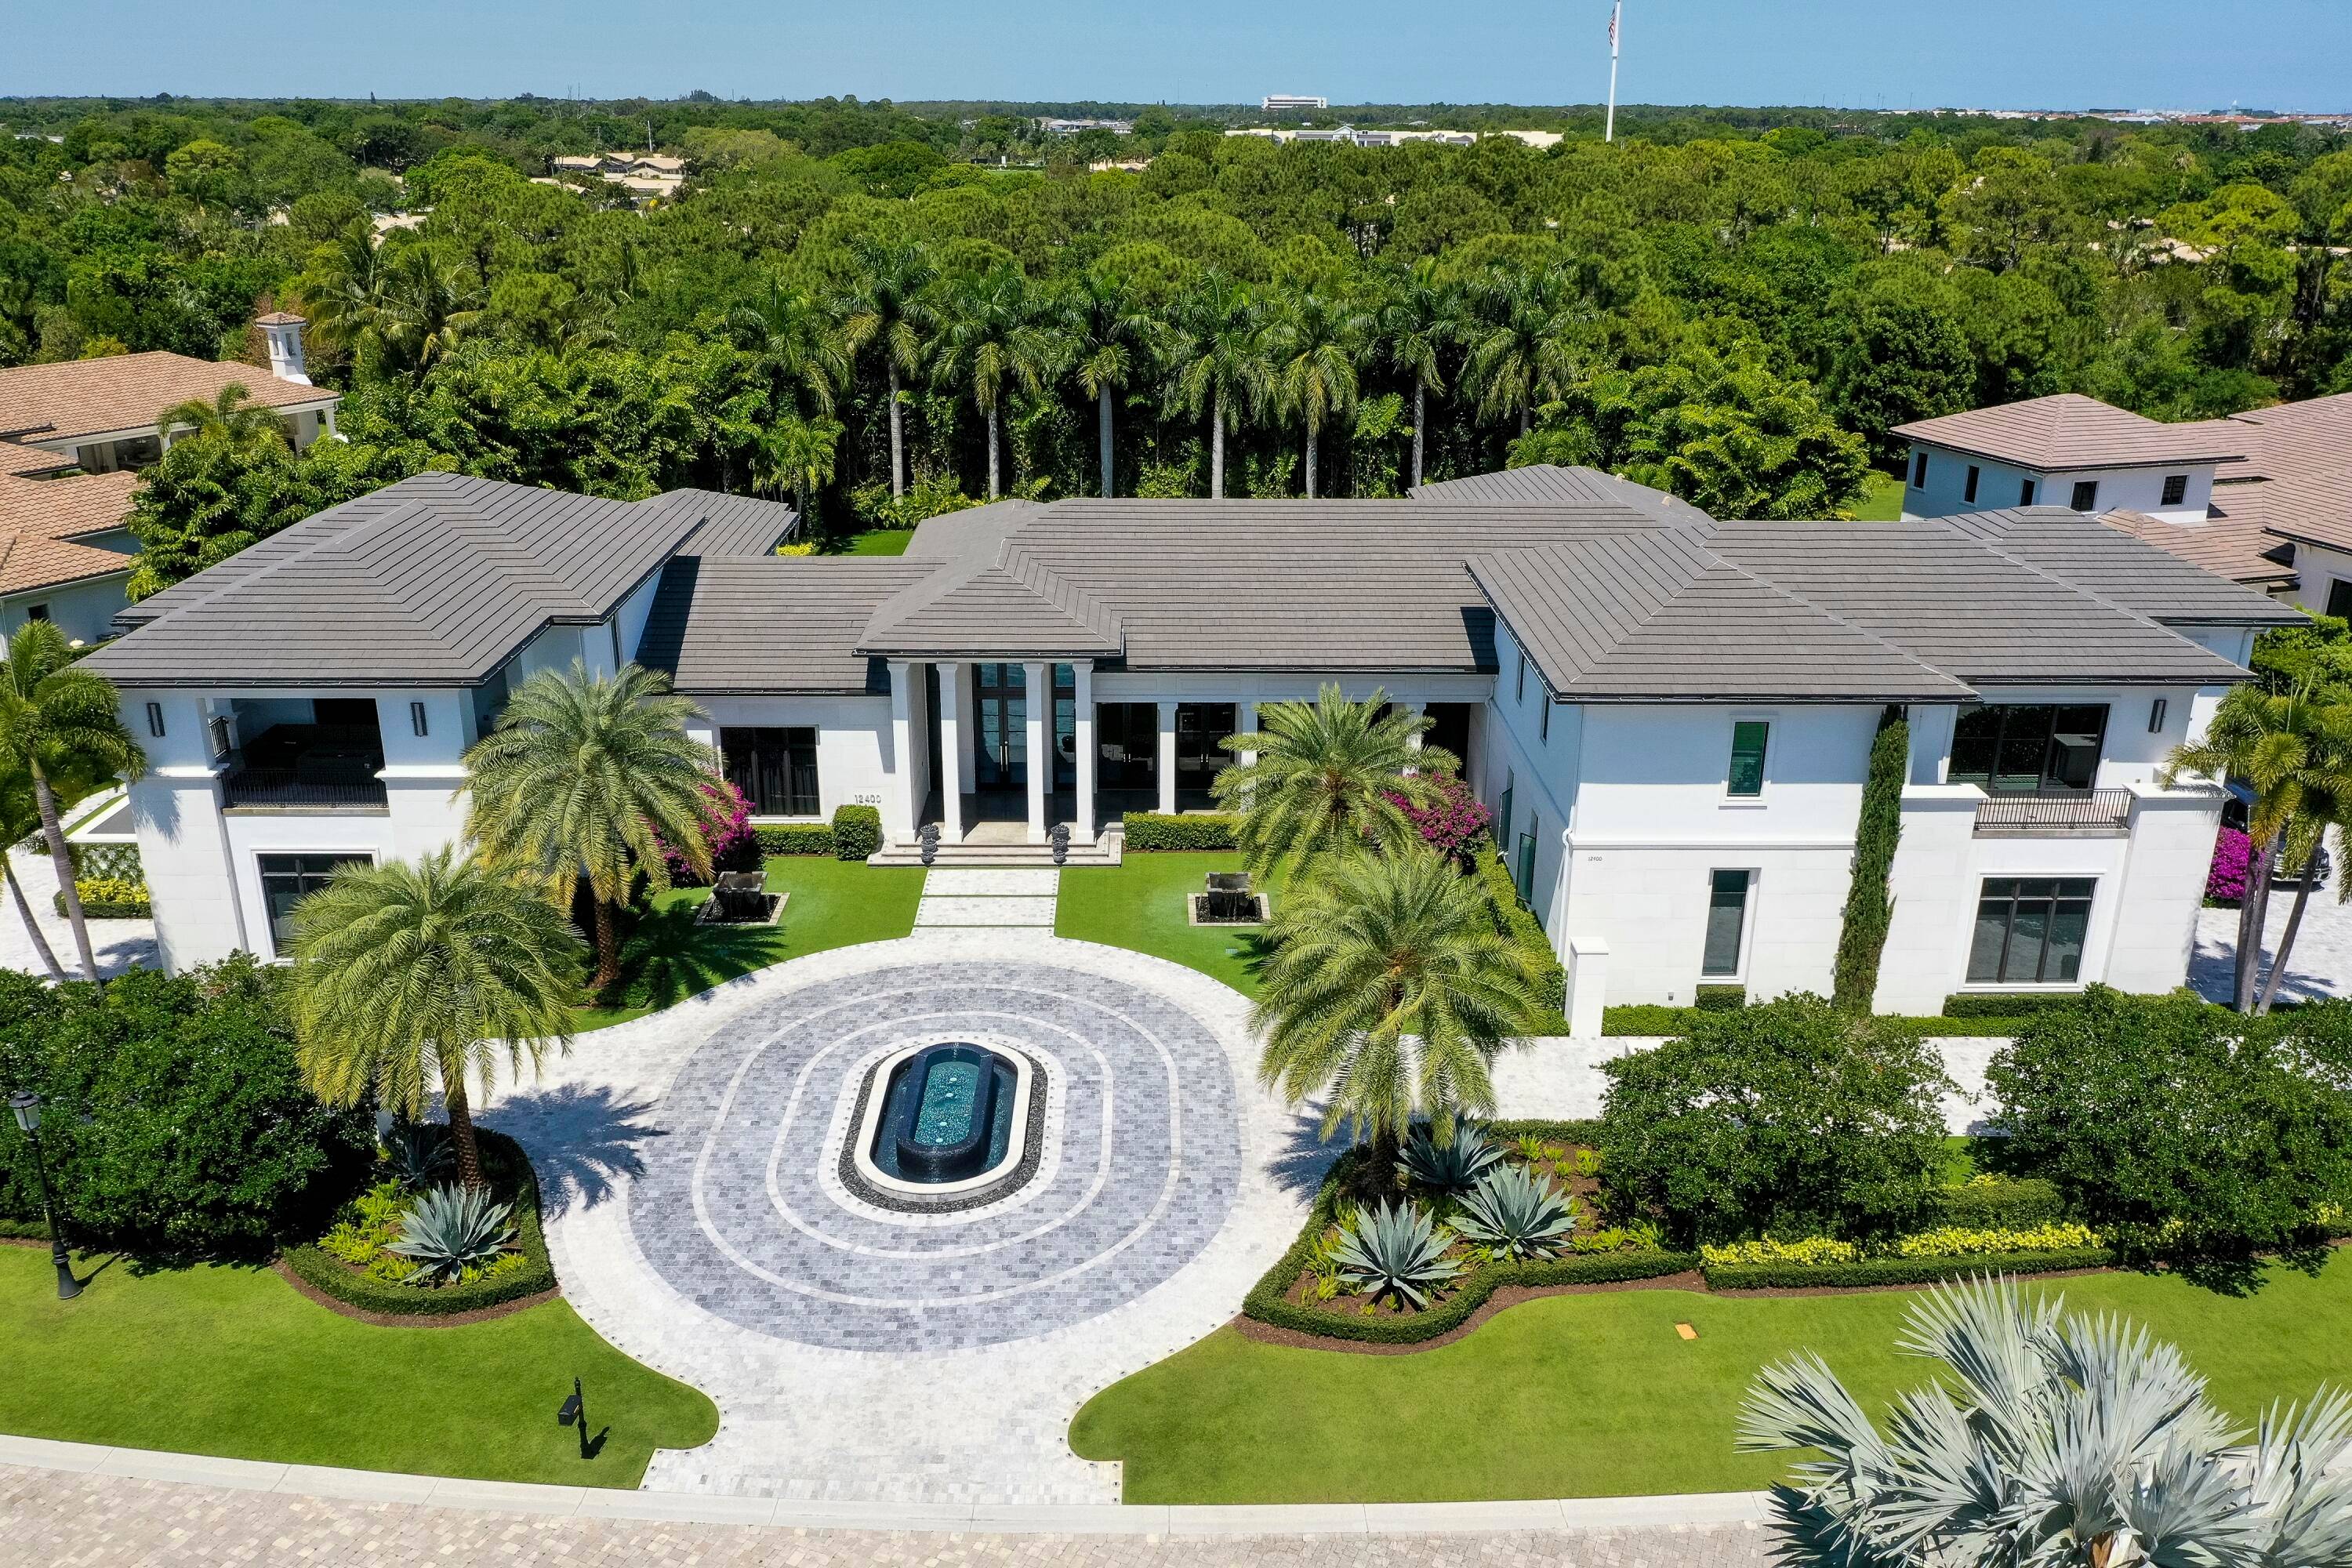 FORTEZZA. Boasting world class displays securities to display the most valuable collections, this bold yet exquisite mansion in Old Palm is now available for your consideration.